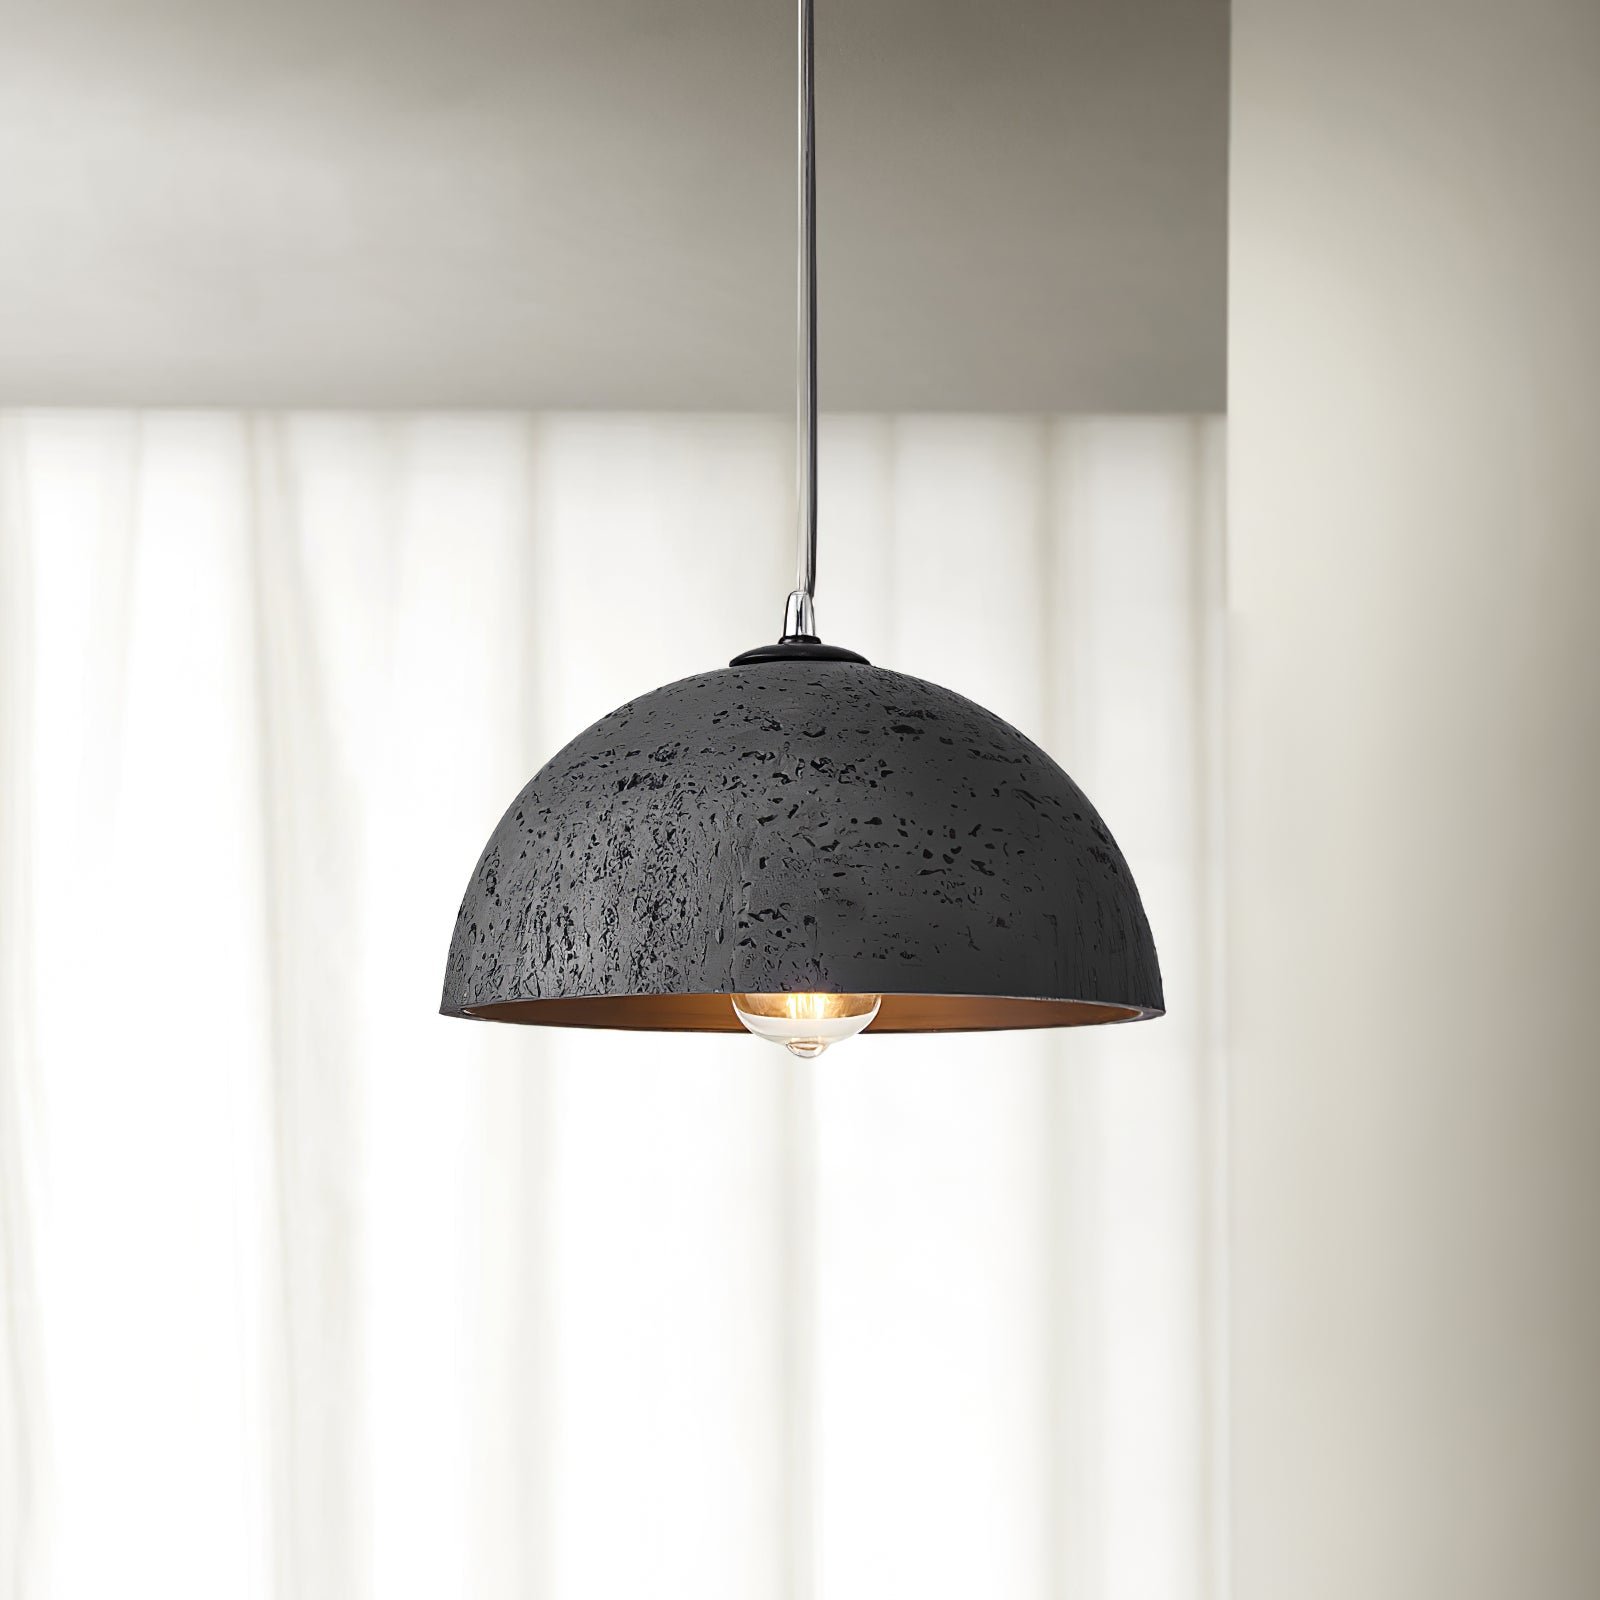 Black Dome Morphe Pendant Light, measuring 11.8 inches in diameter and 9.8 inches in height (or 30cm x 25cm).